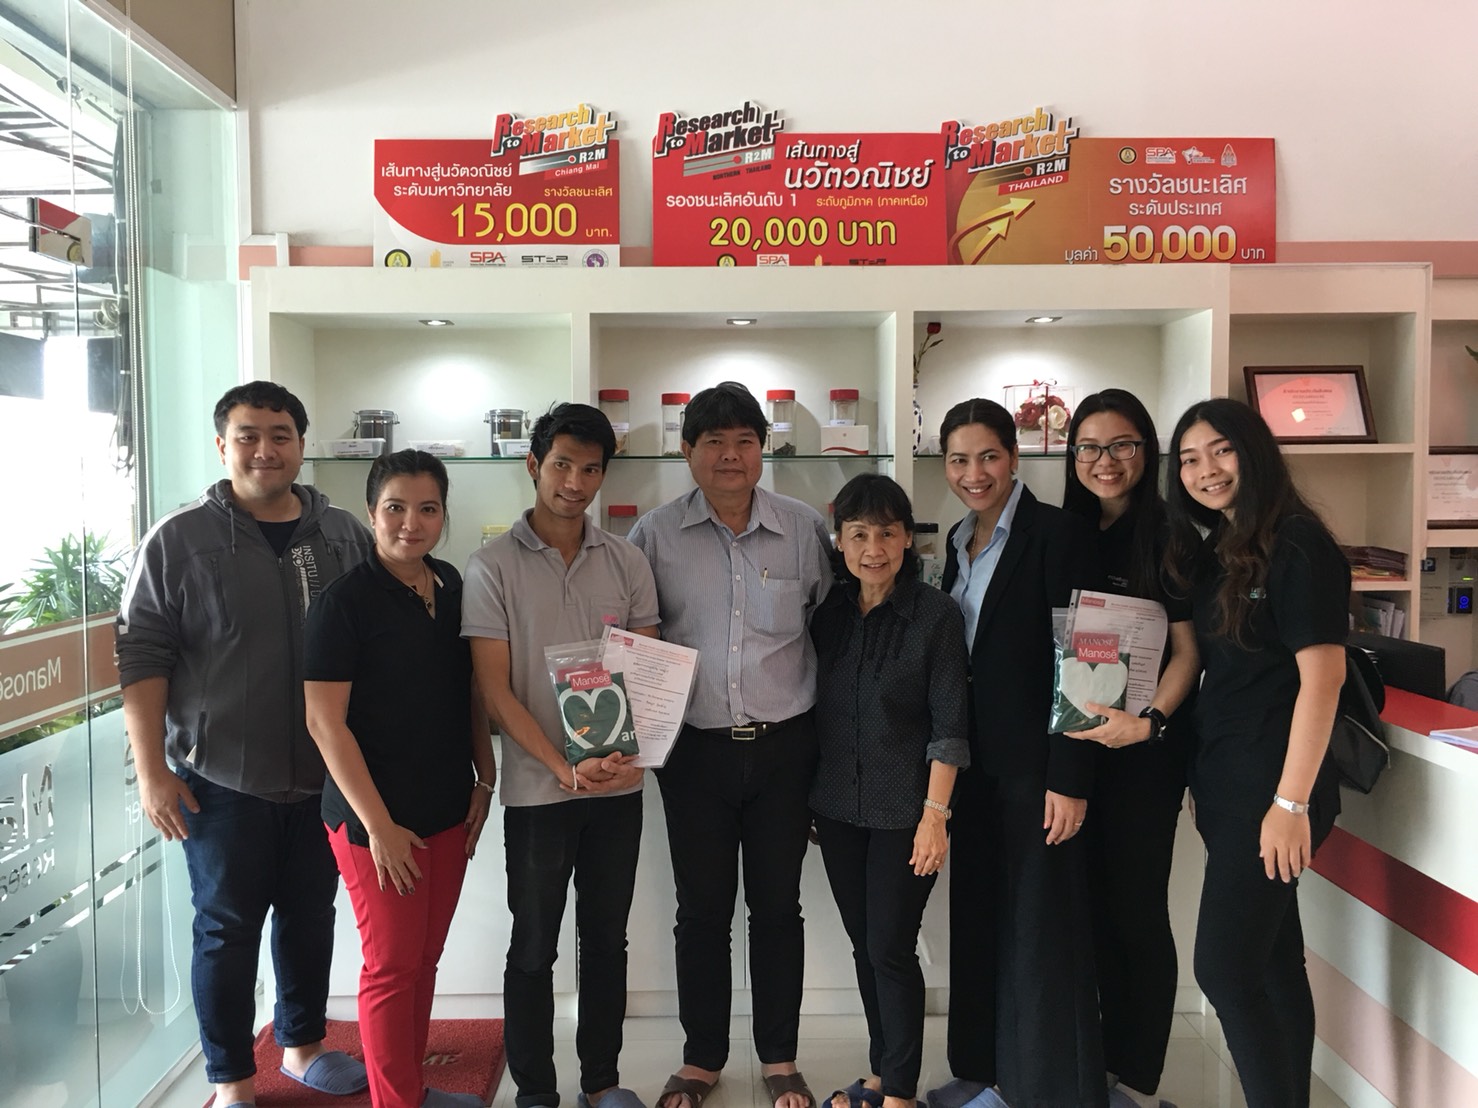 Miss Pimphida Vidchayapimjura, the Project Coordinator, Product Development of Innovative House under Industry Division, Thailand  Research Fund (TRF) and her team have bought Miss Raewadee Katekaew (the Entrepreneur) to visit Manose Health and Beauty Research Center